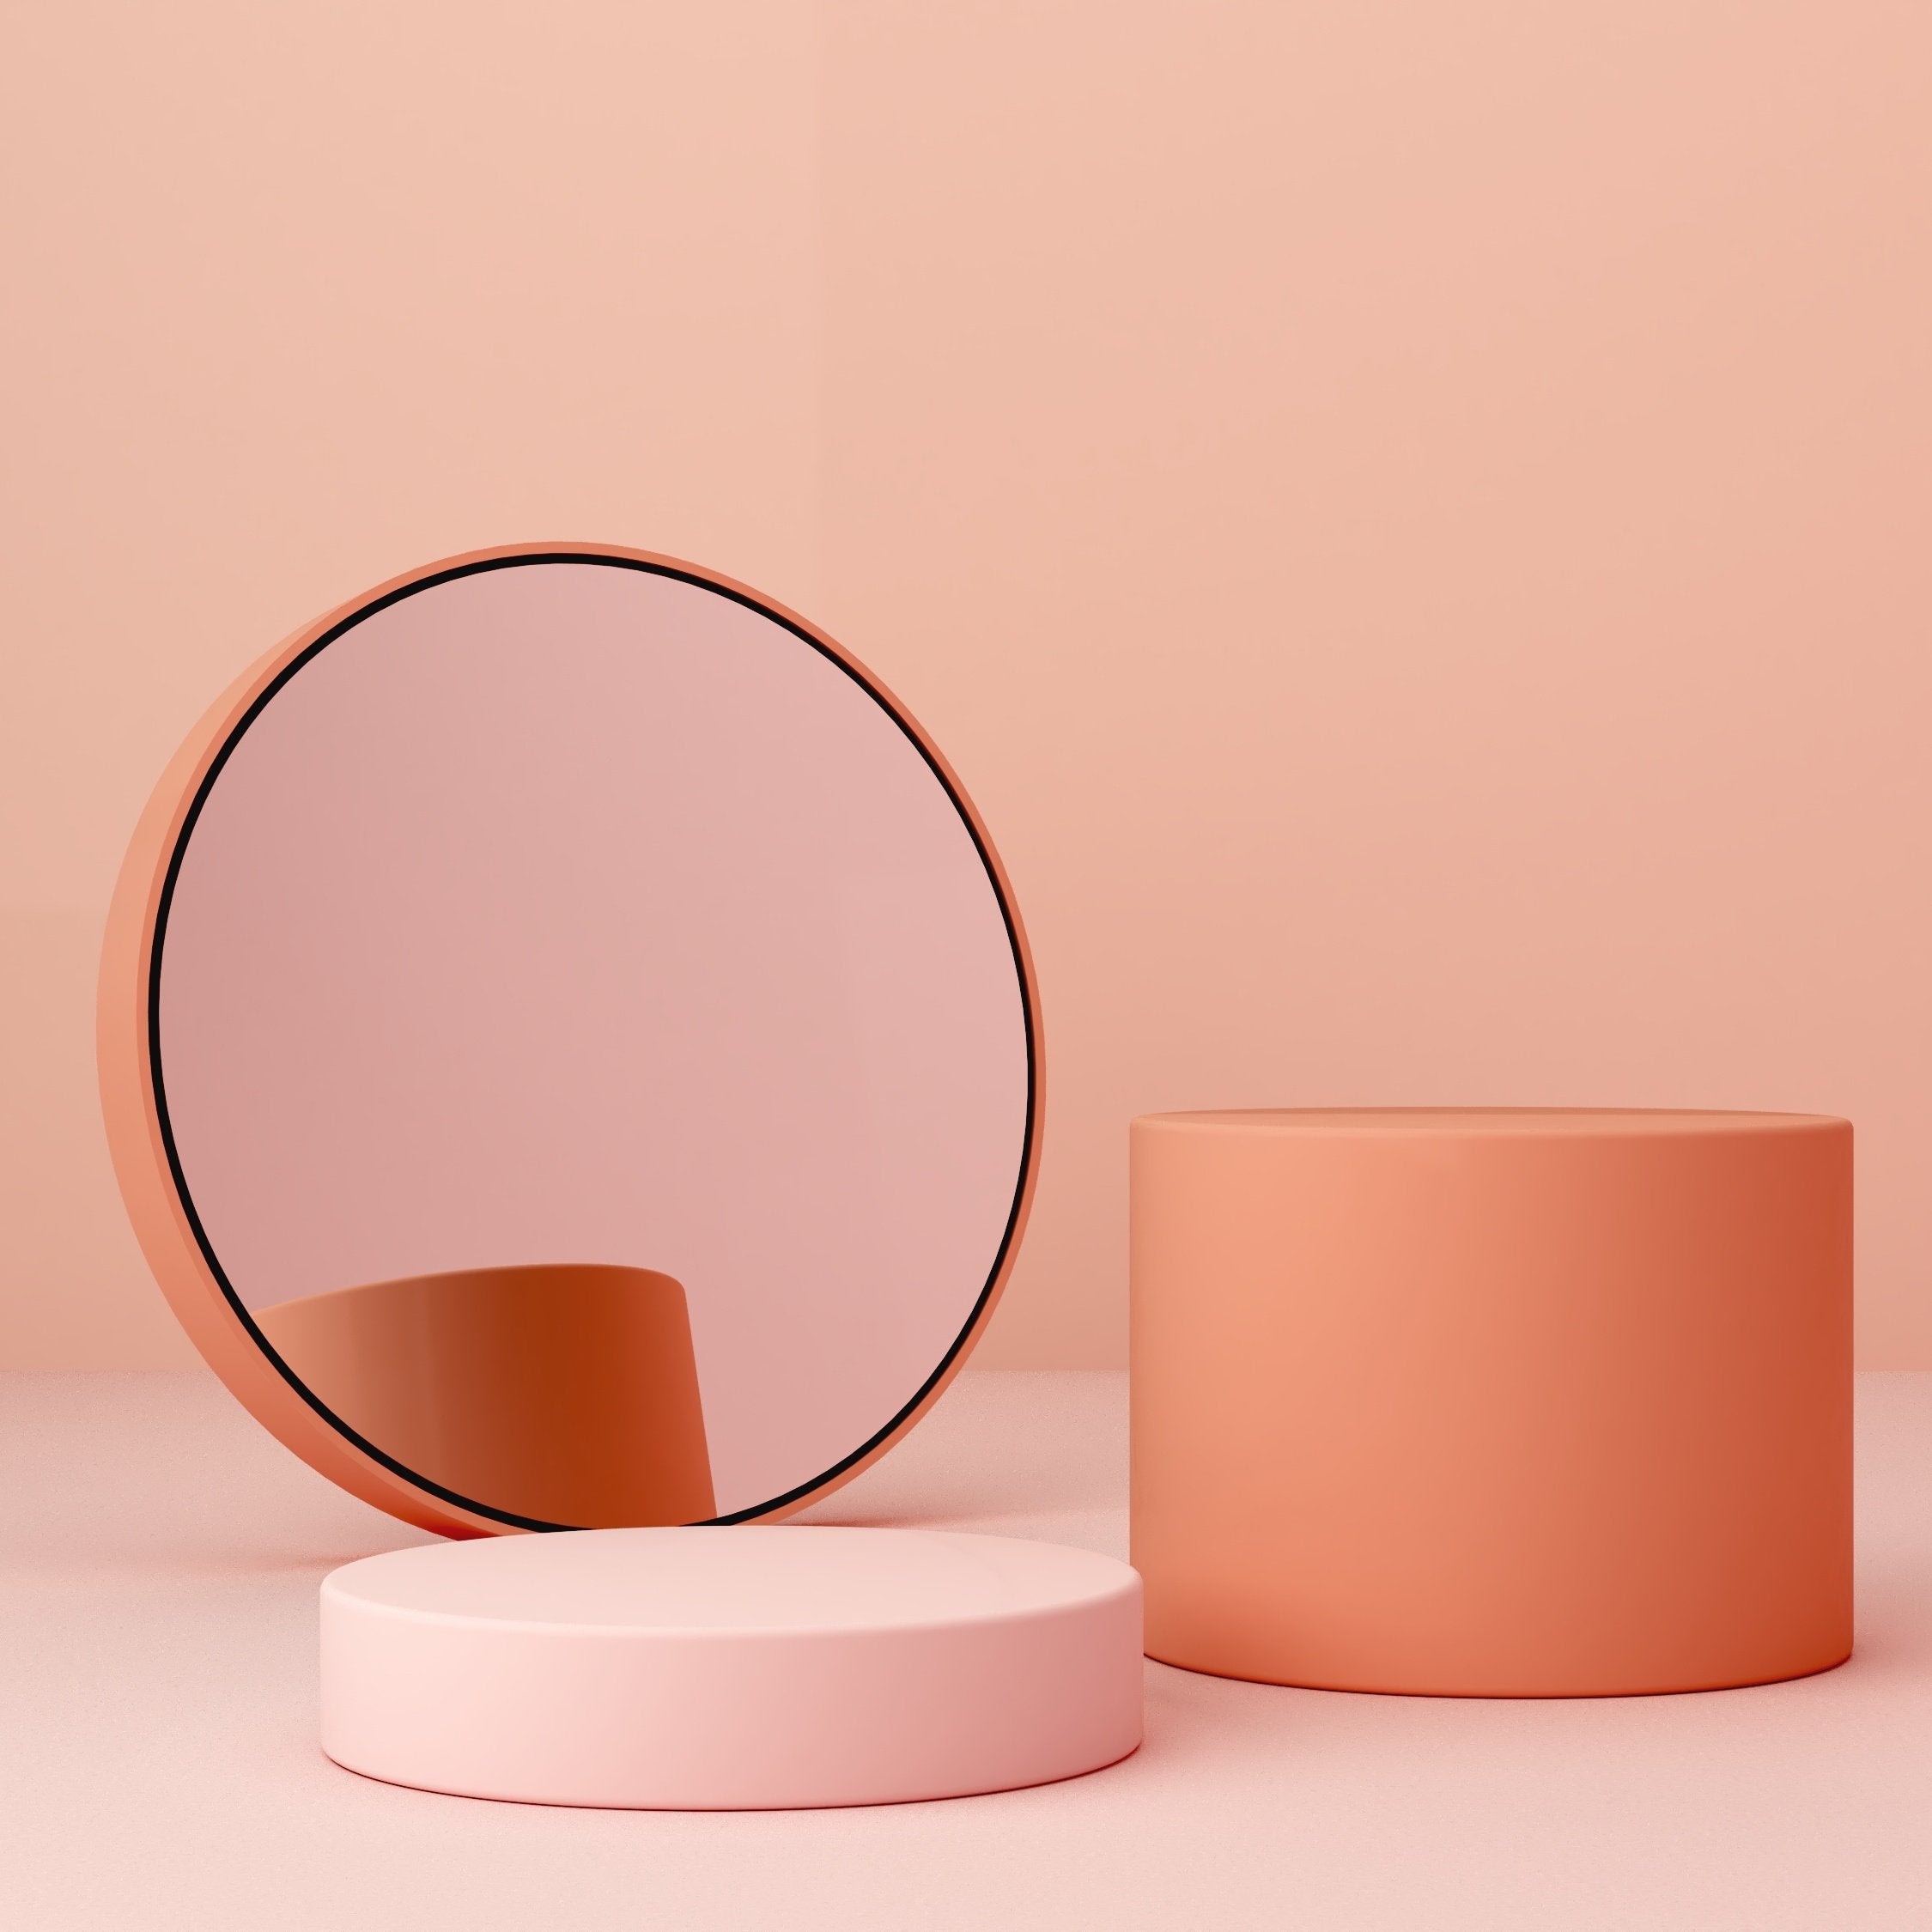 Reframing the Beauty Industry - Pink Moon